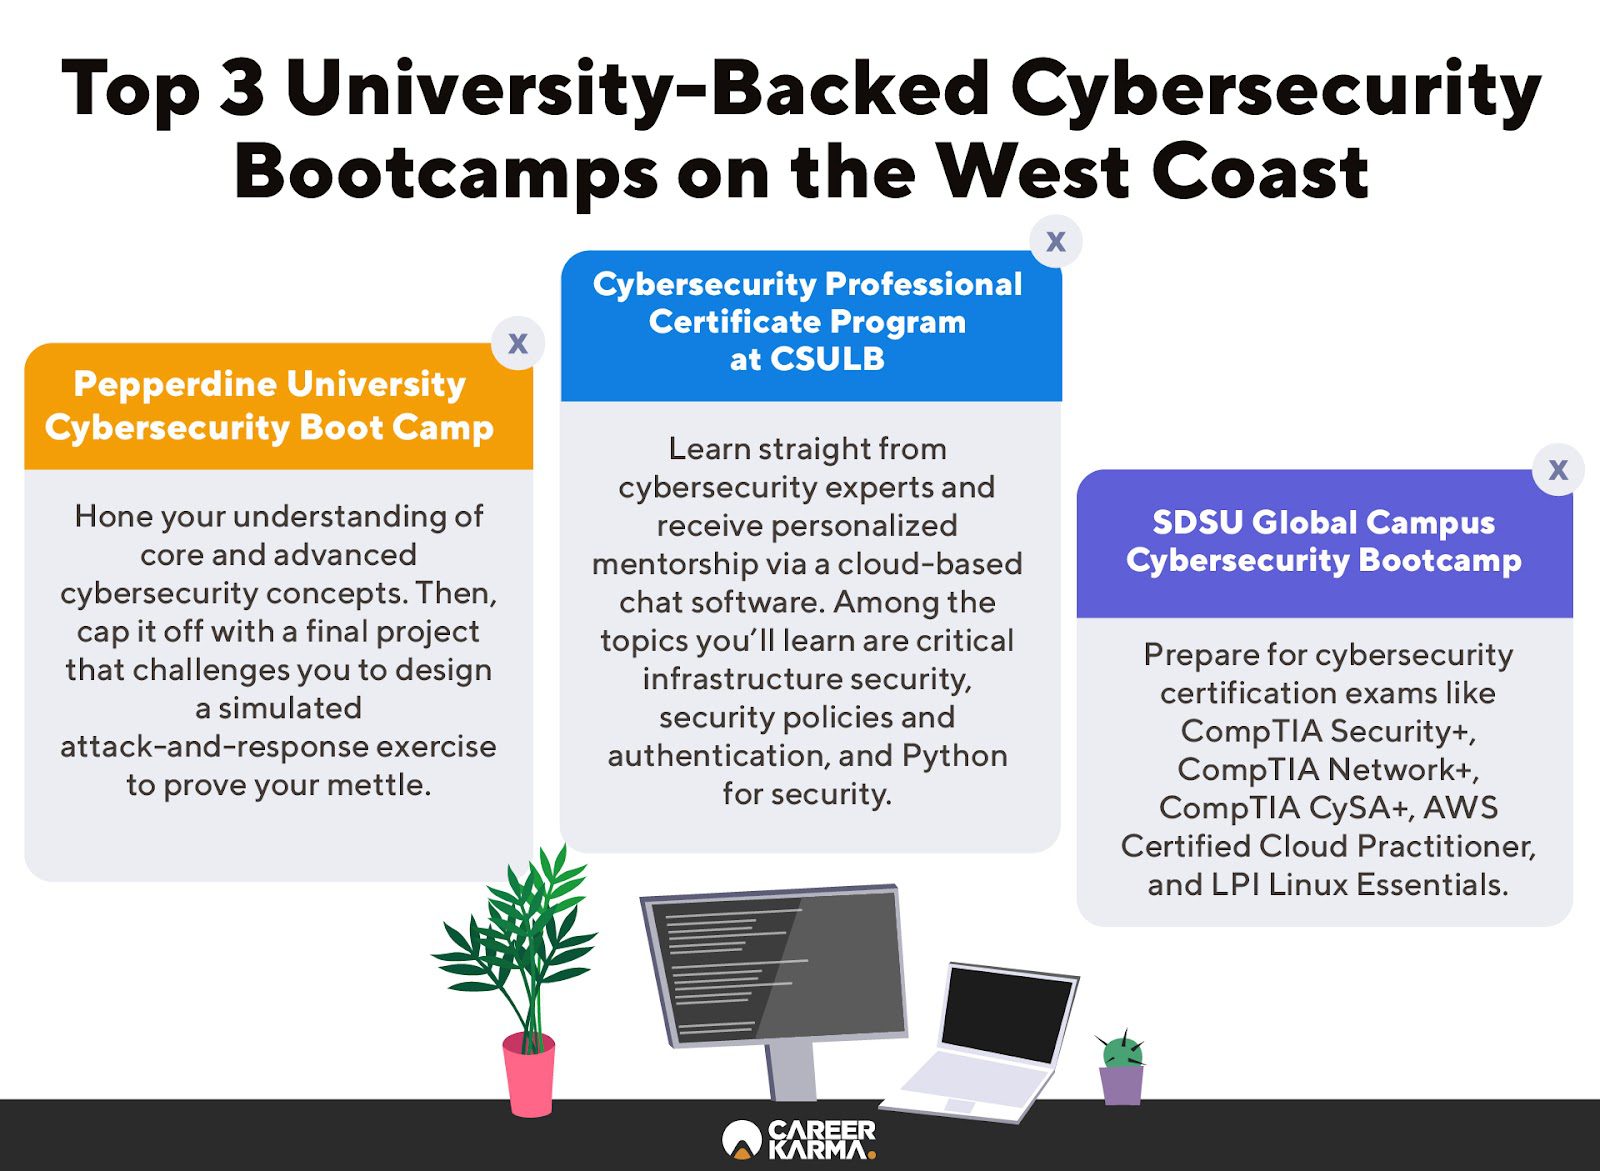 An infographic listing three cybersecurity bootcamps on the West Coast